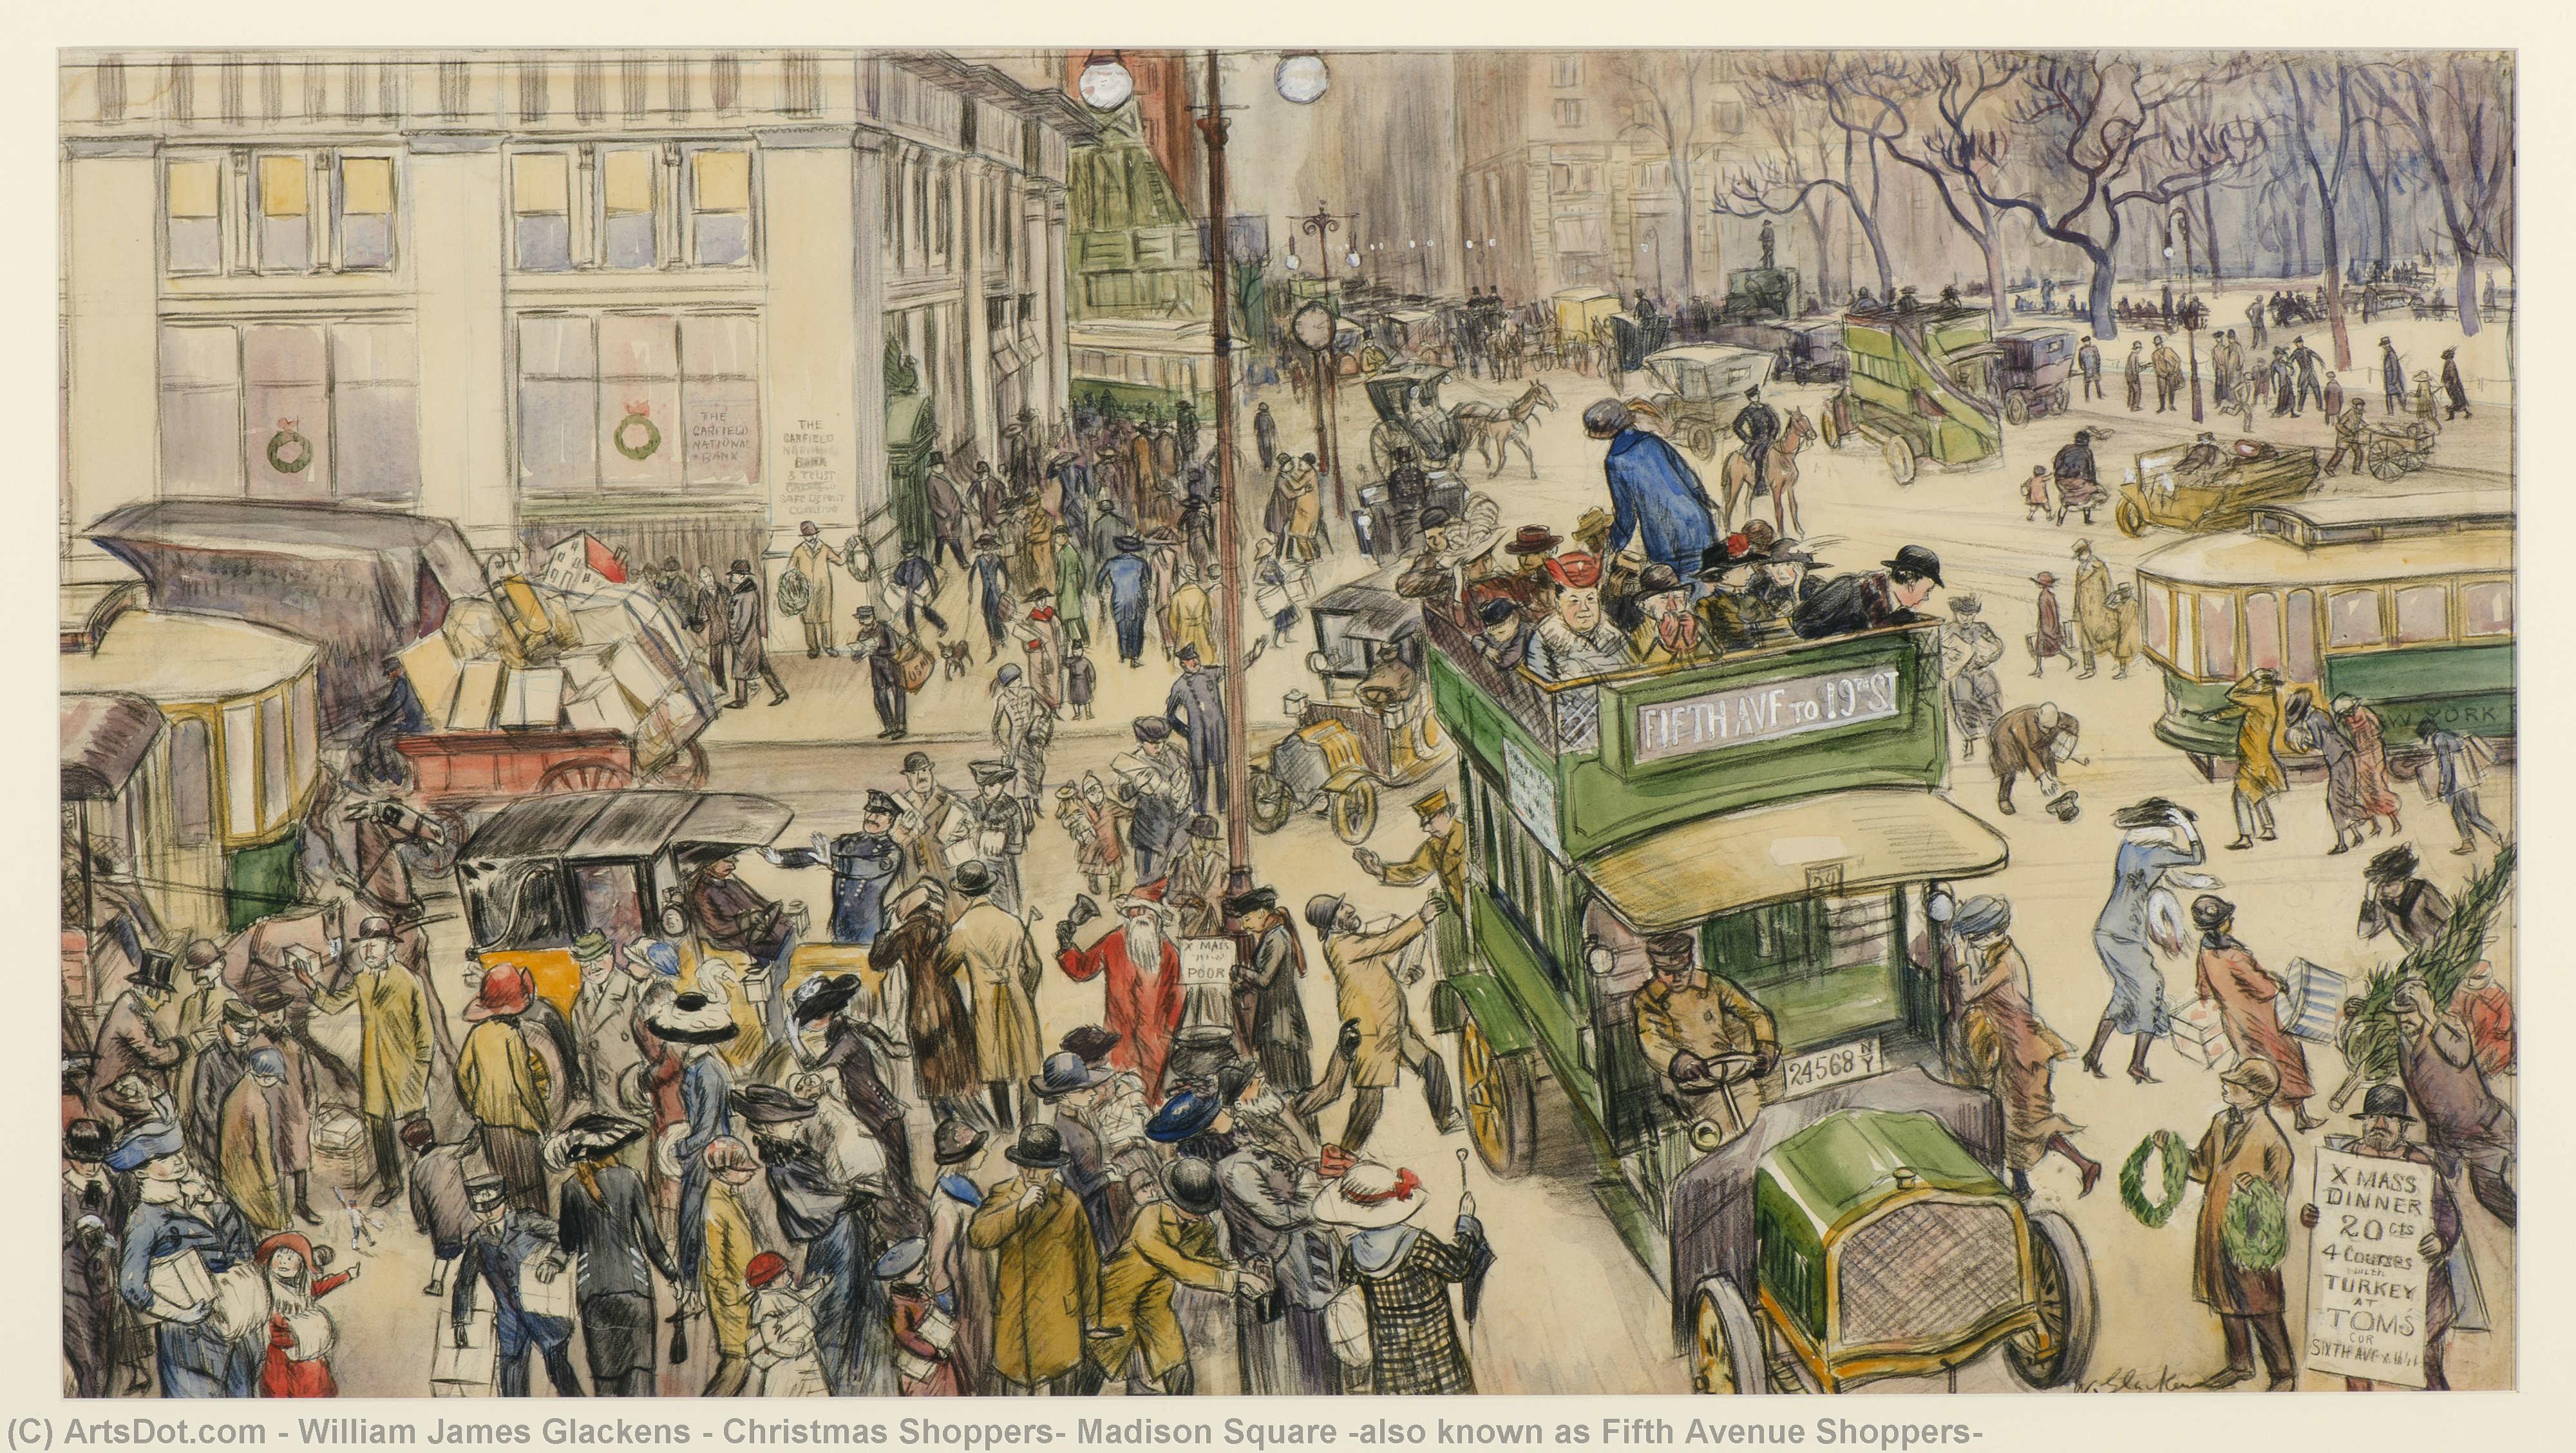 WikiOO.org - Encyclopedia of Fine Arts - Maalaus, taideteos William James Glackens - Christmas Shoppers, Madison Square (also known as Fifth Avenue Shoppers)